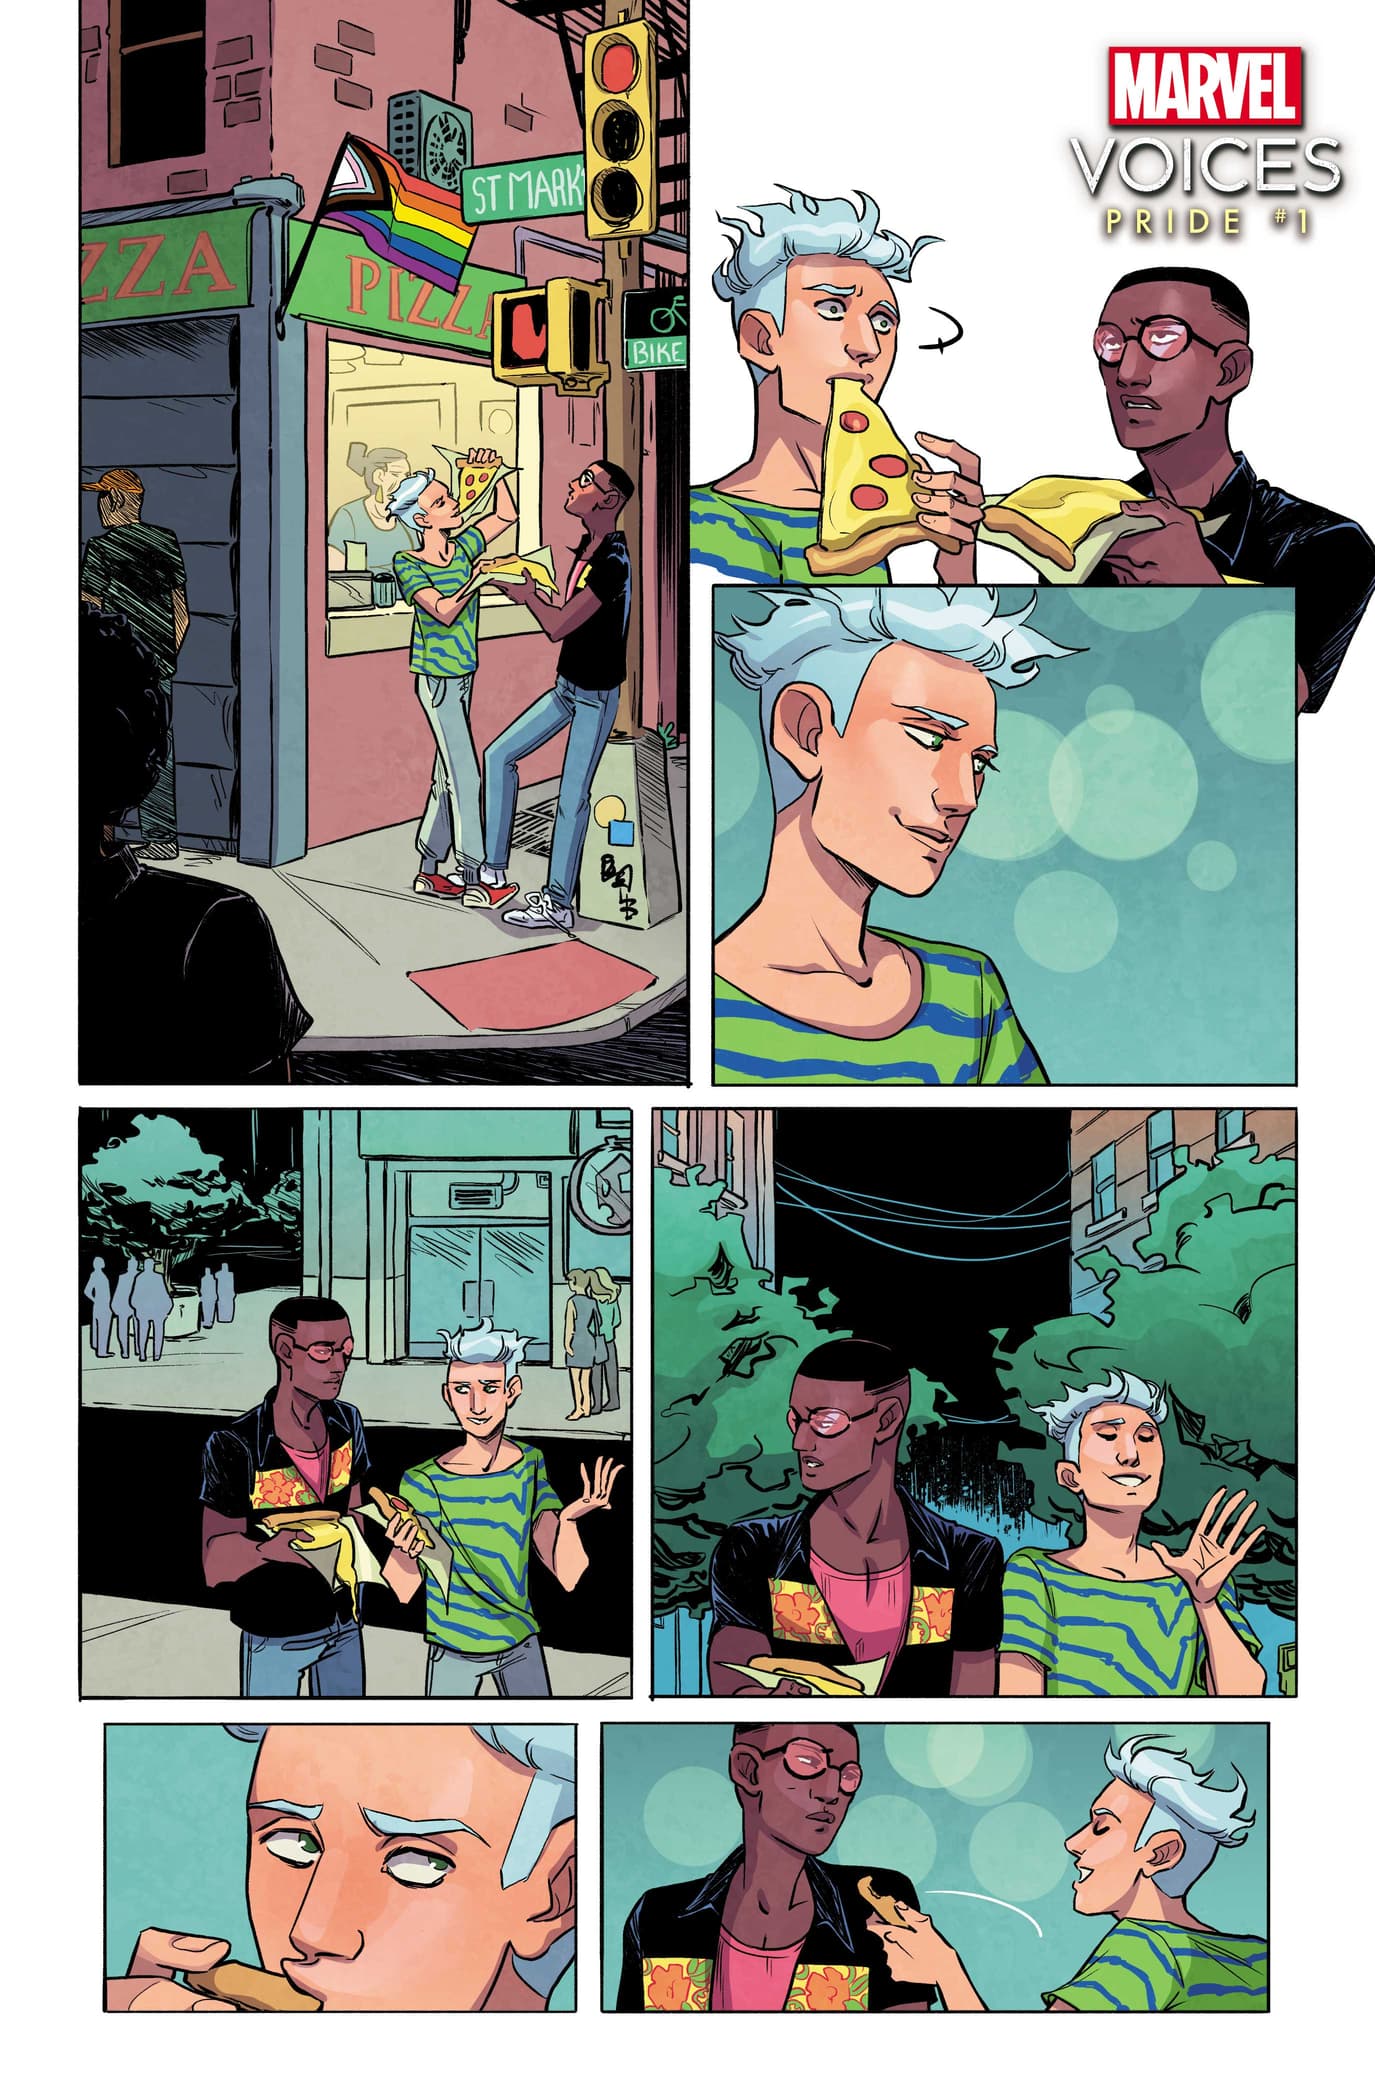 MARVEL'S VOICES: PRIDE #1 preview art by Jen Hickman, colors by Brittany Peer